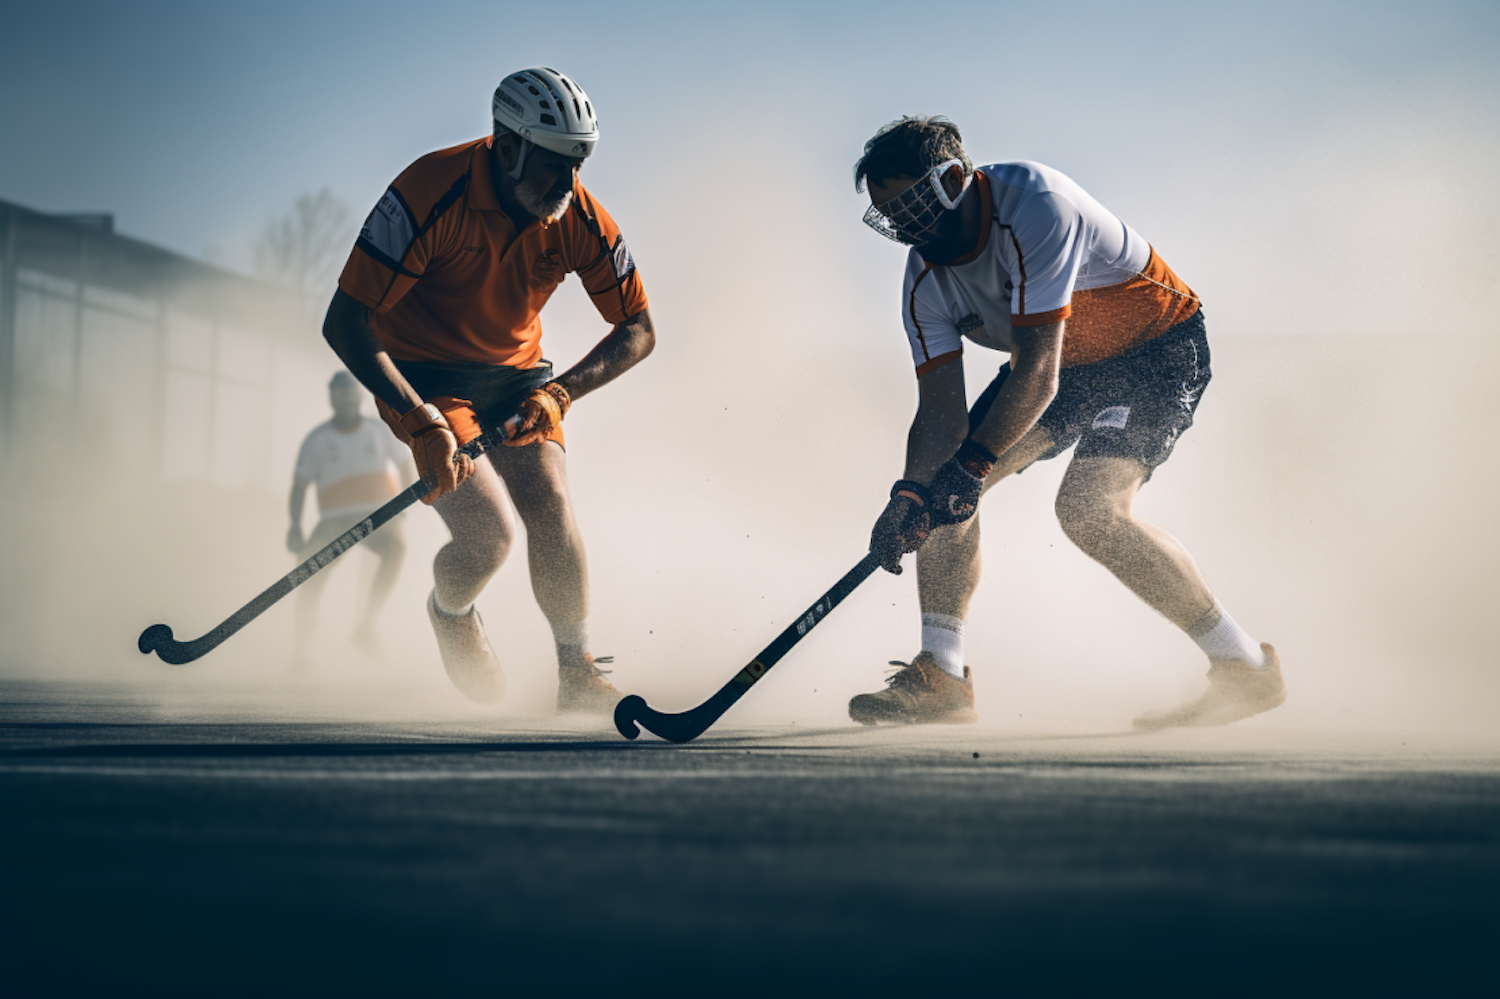 Field Hockey Showdown: A Duel of Speed and Strategy